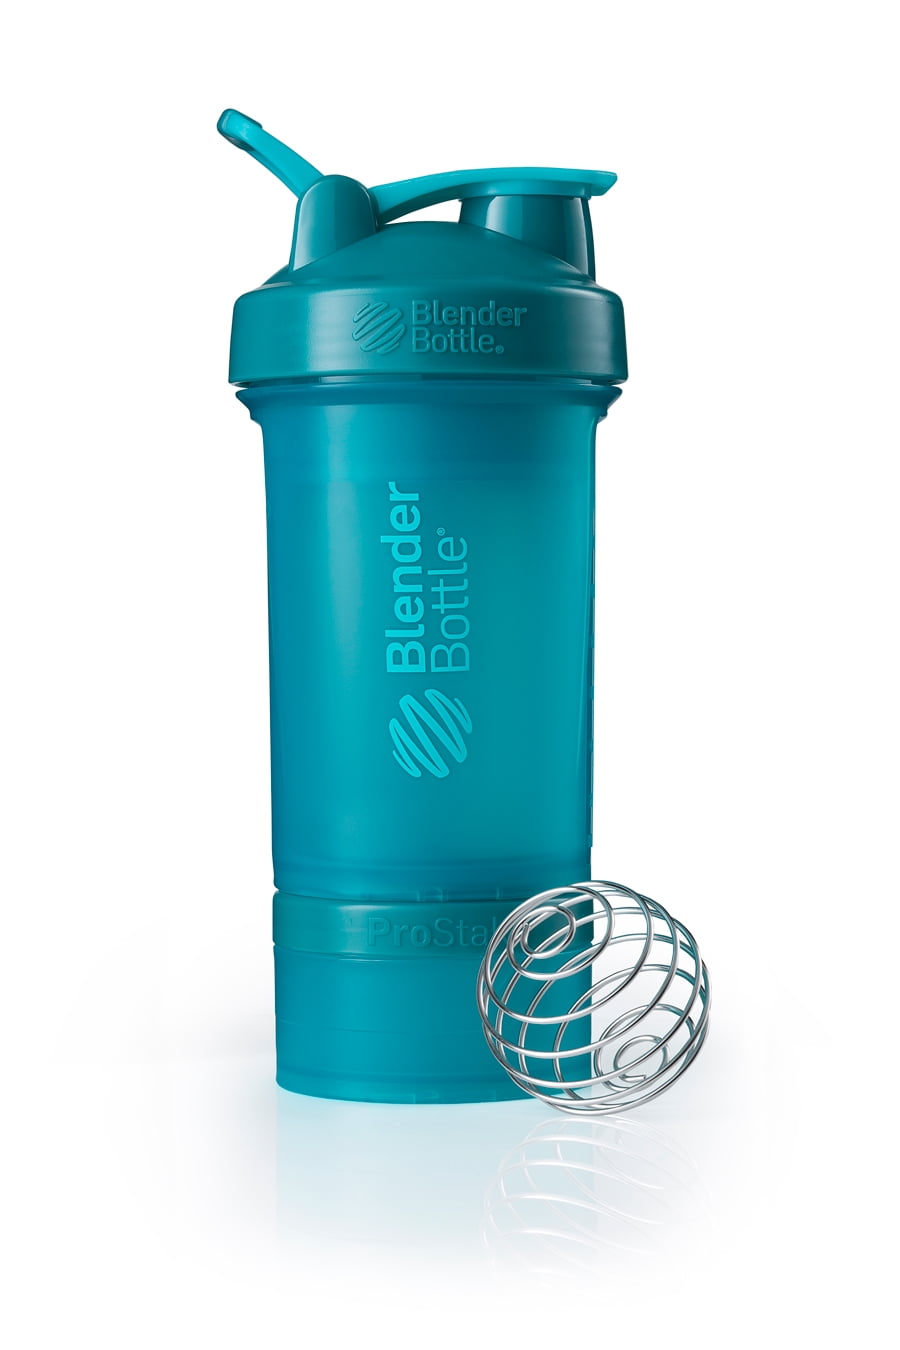 BluePeak Stacker Protein Shaker Bottle 22-Ounce, 2-Pack ProStak. Attachable  Storage Containers (100 & 150cc) and Pill Tray Included. BPA Free (Black  &Yellow) price in UAE,  UAE